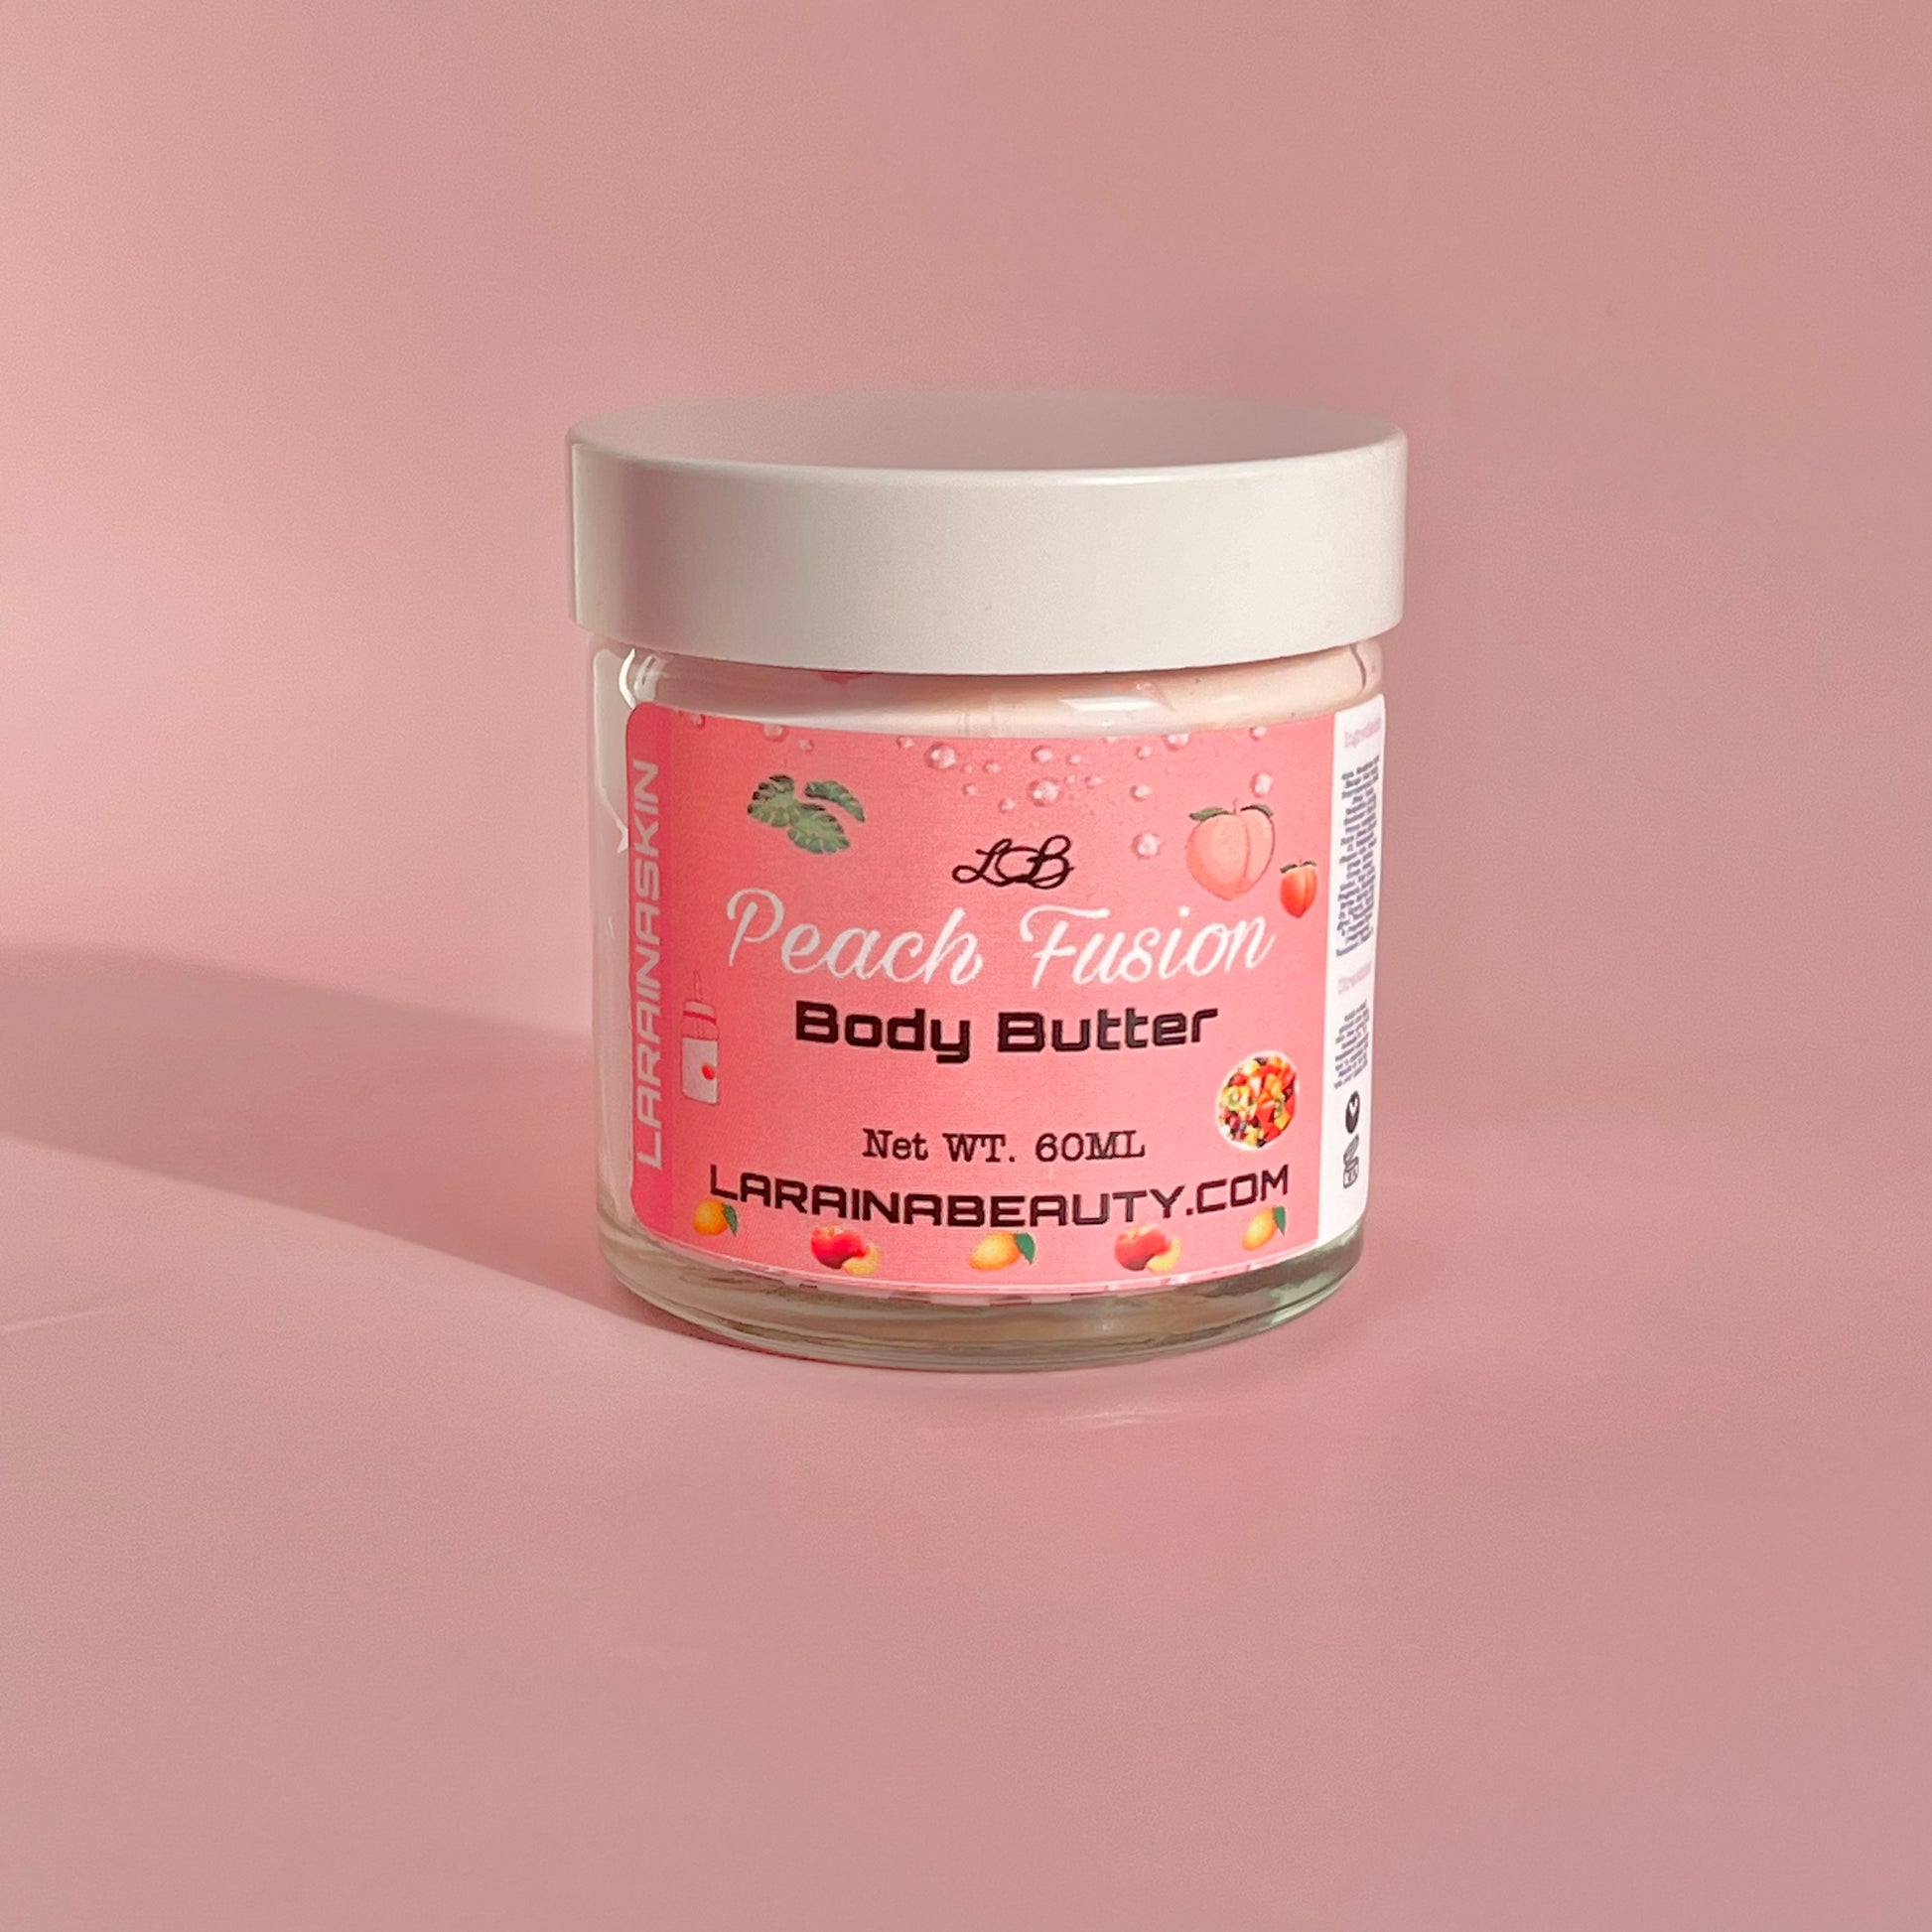 peach and mango salsa fruit fusion is a sweet tropical body butter cream with the most and best moisturising benefits to dry skin. the best uk body cream that leaves the skin glowing, packed with vitamin e, 99% natural ingredients and alcohol free. 